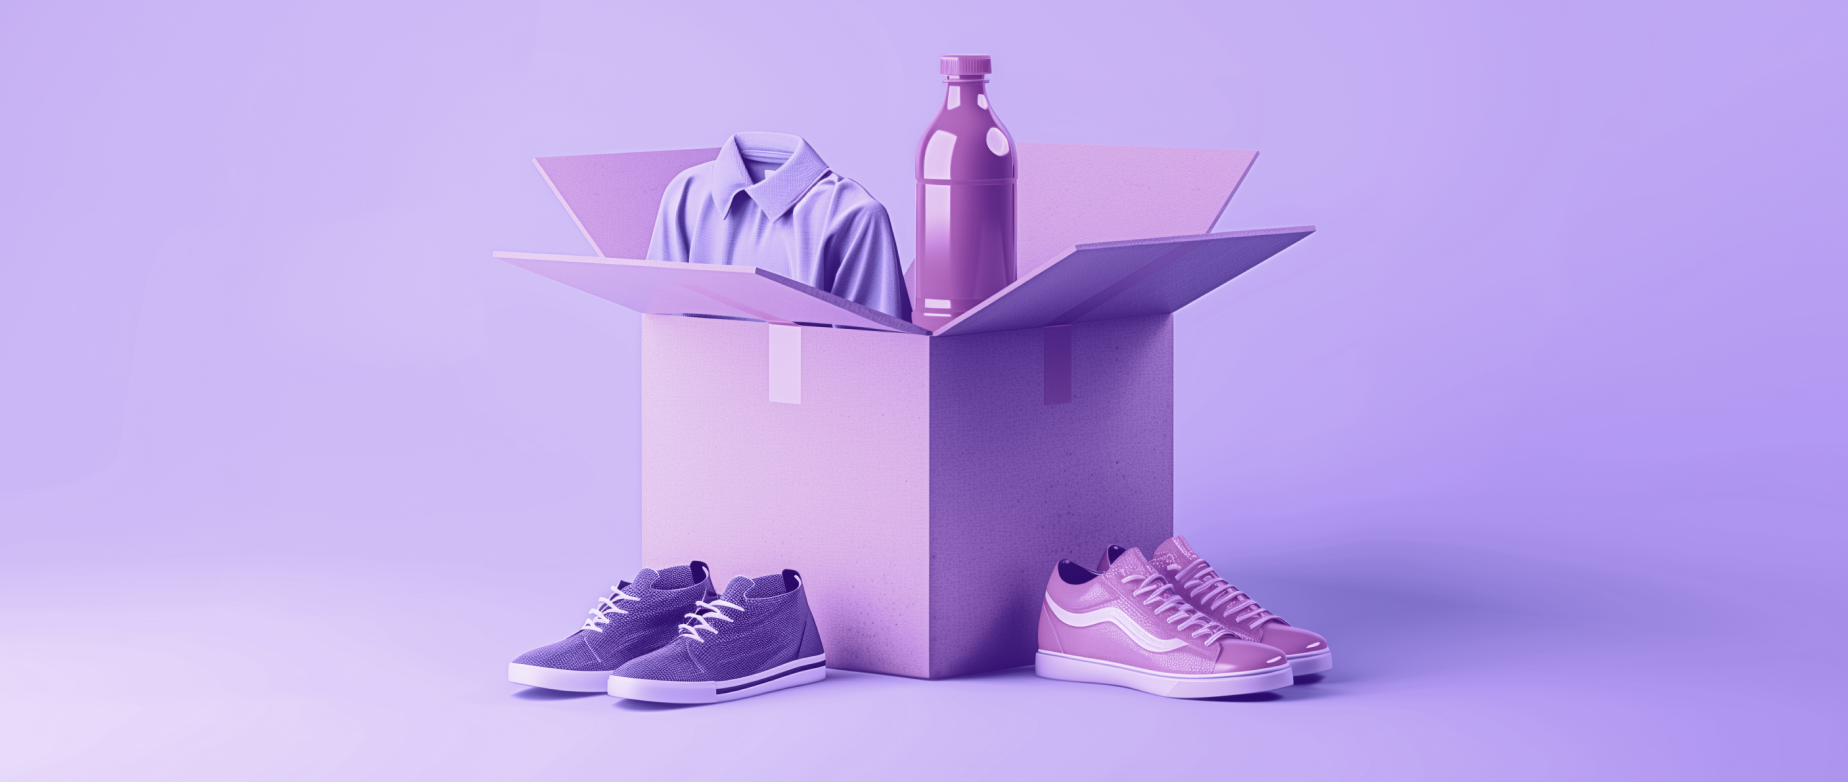 An open cardboard box filled with consumer goods (shirt, water bottle, shoes) on a purple background.